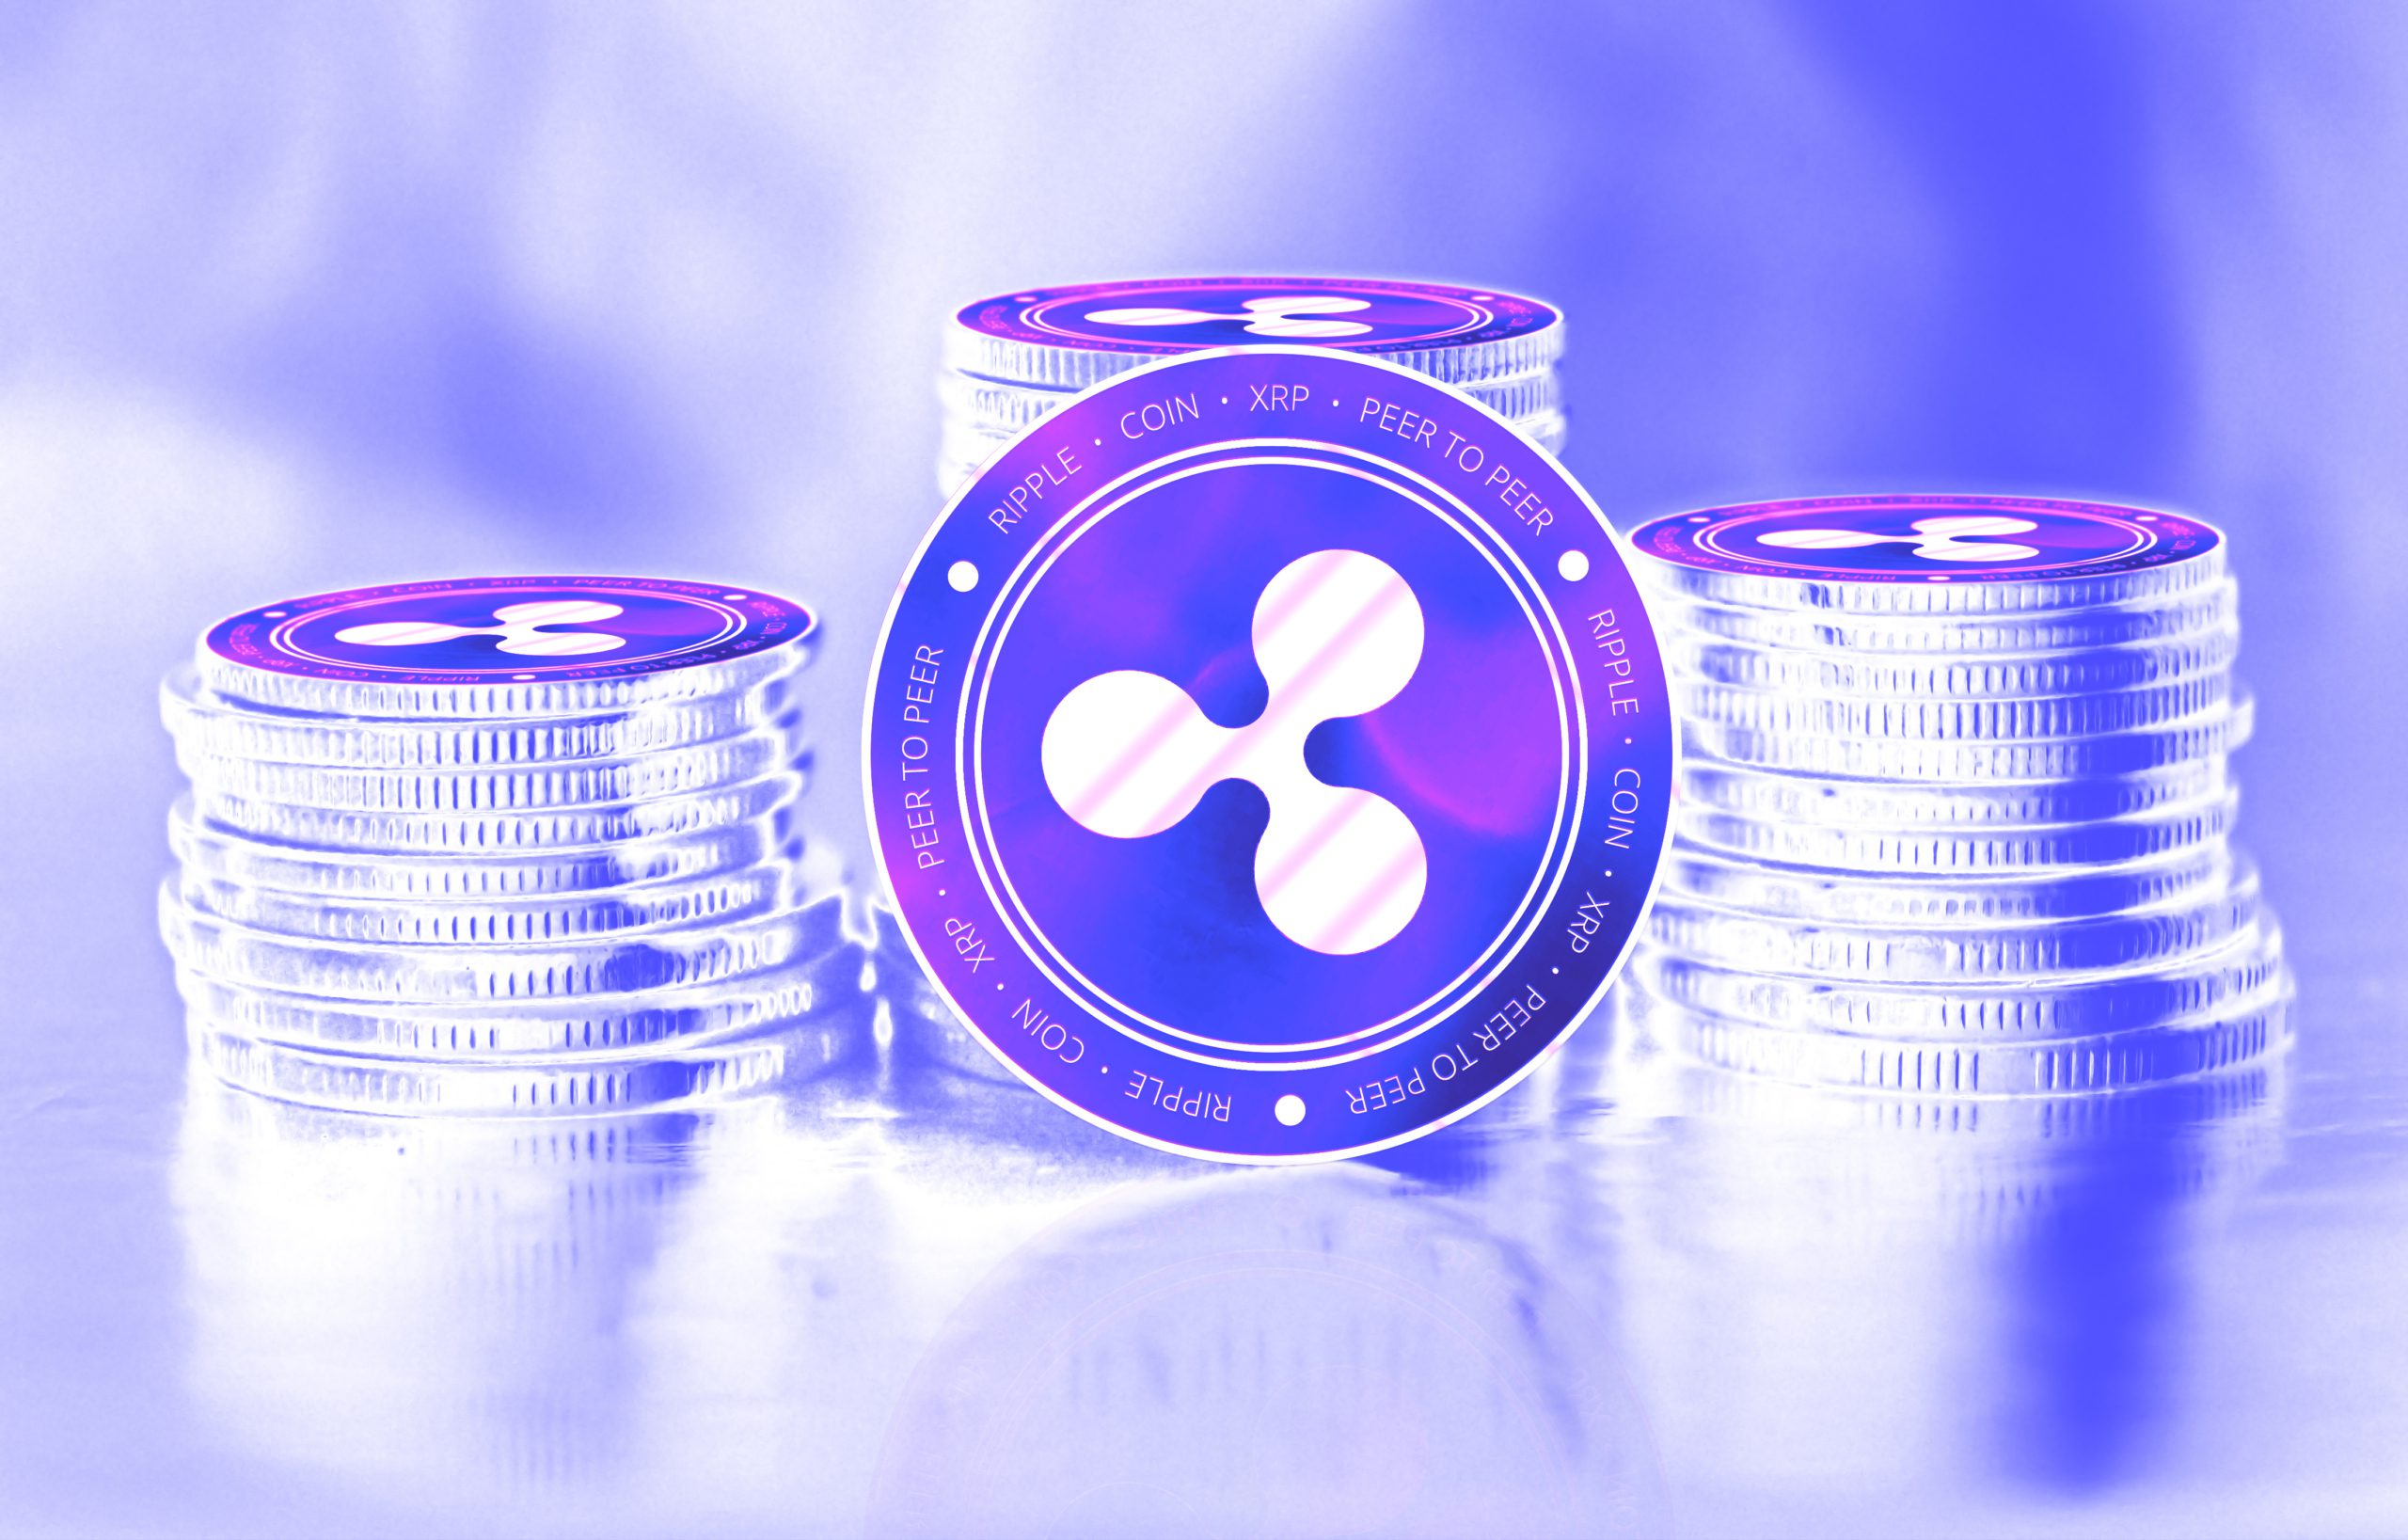 Two crucial decisions in Ripple lawsuit this week
